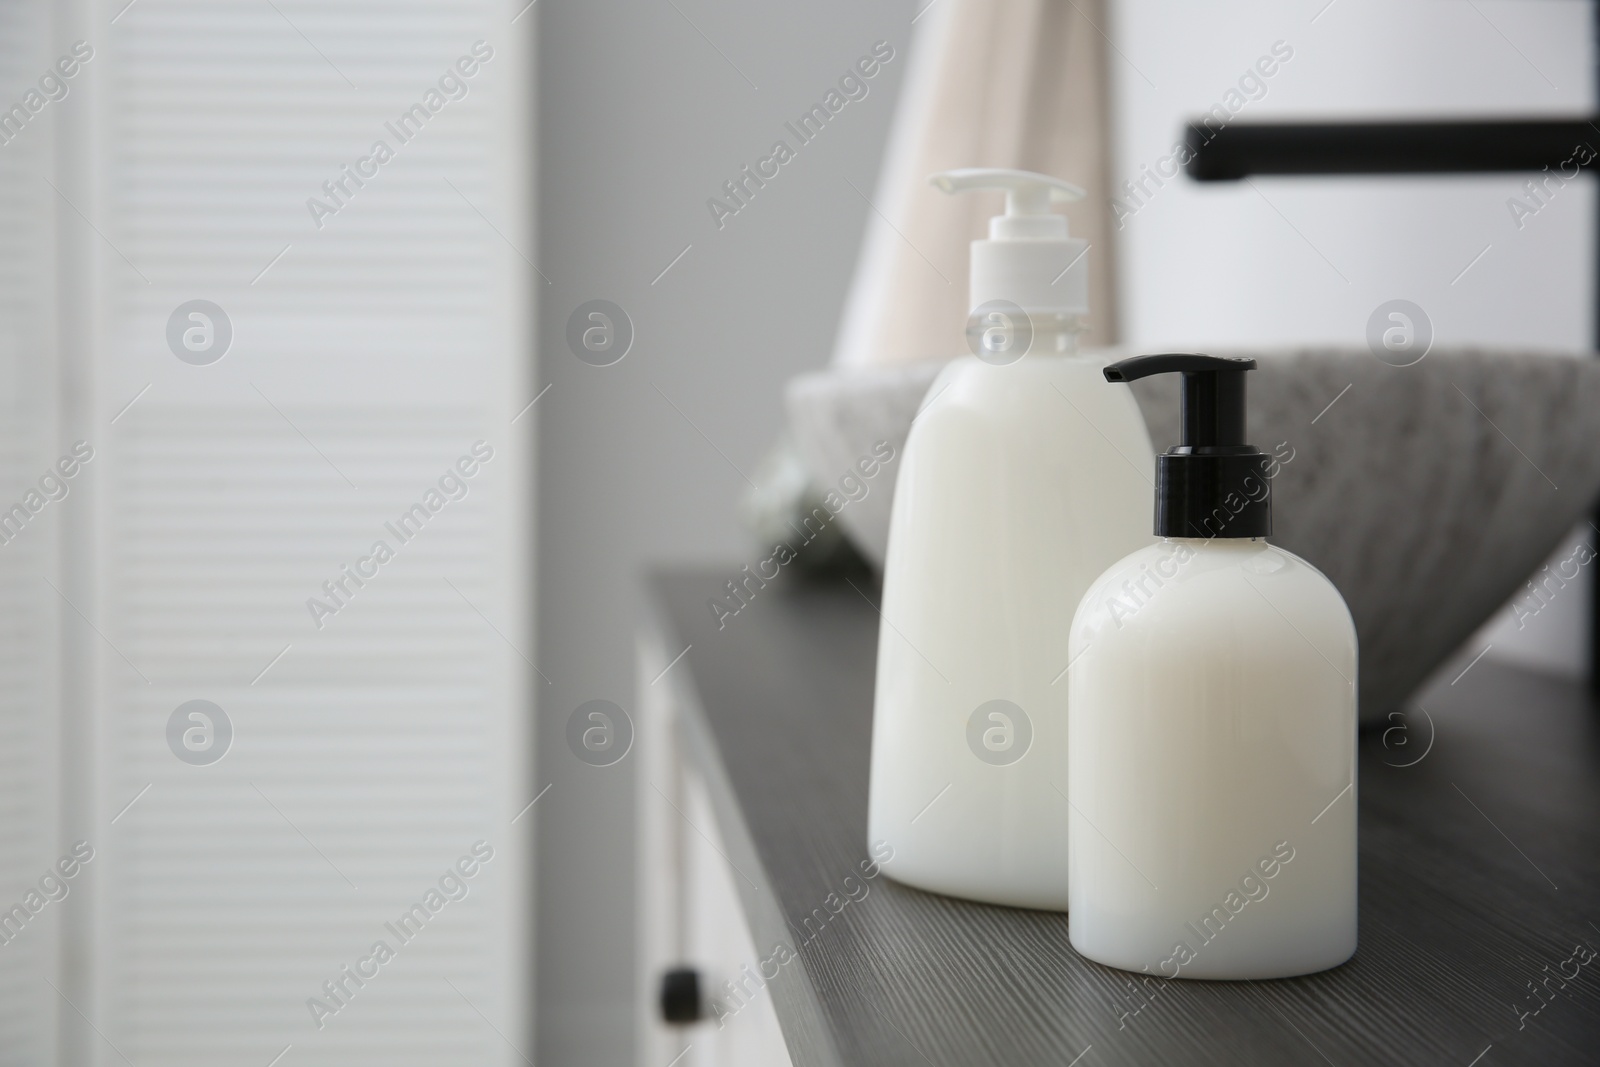 Photo of Dispensers of liquid soap on countertop in bathroom. Space for text